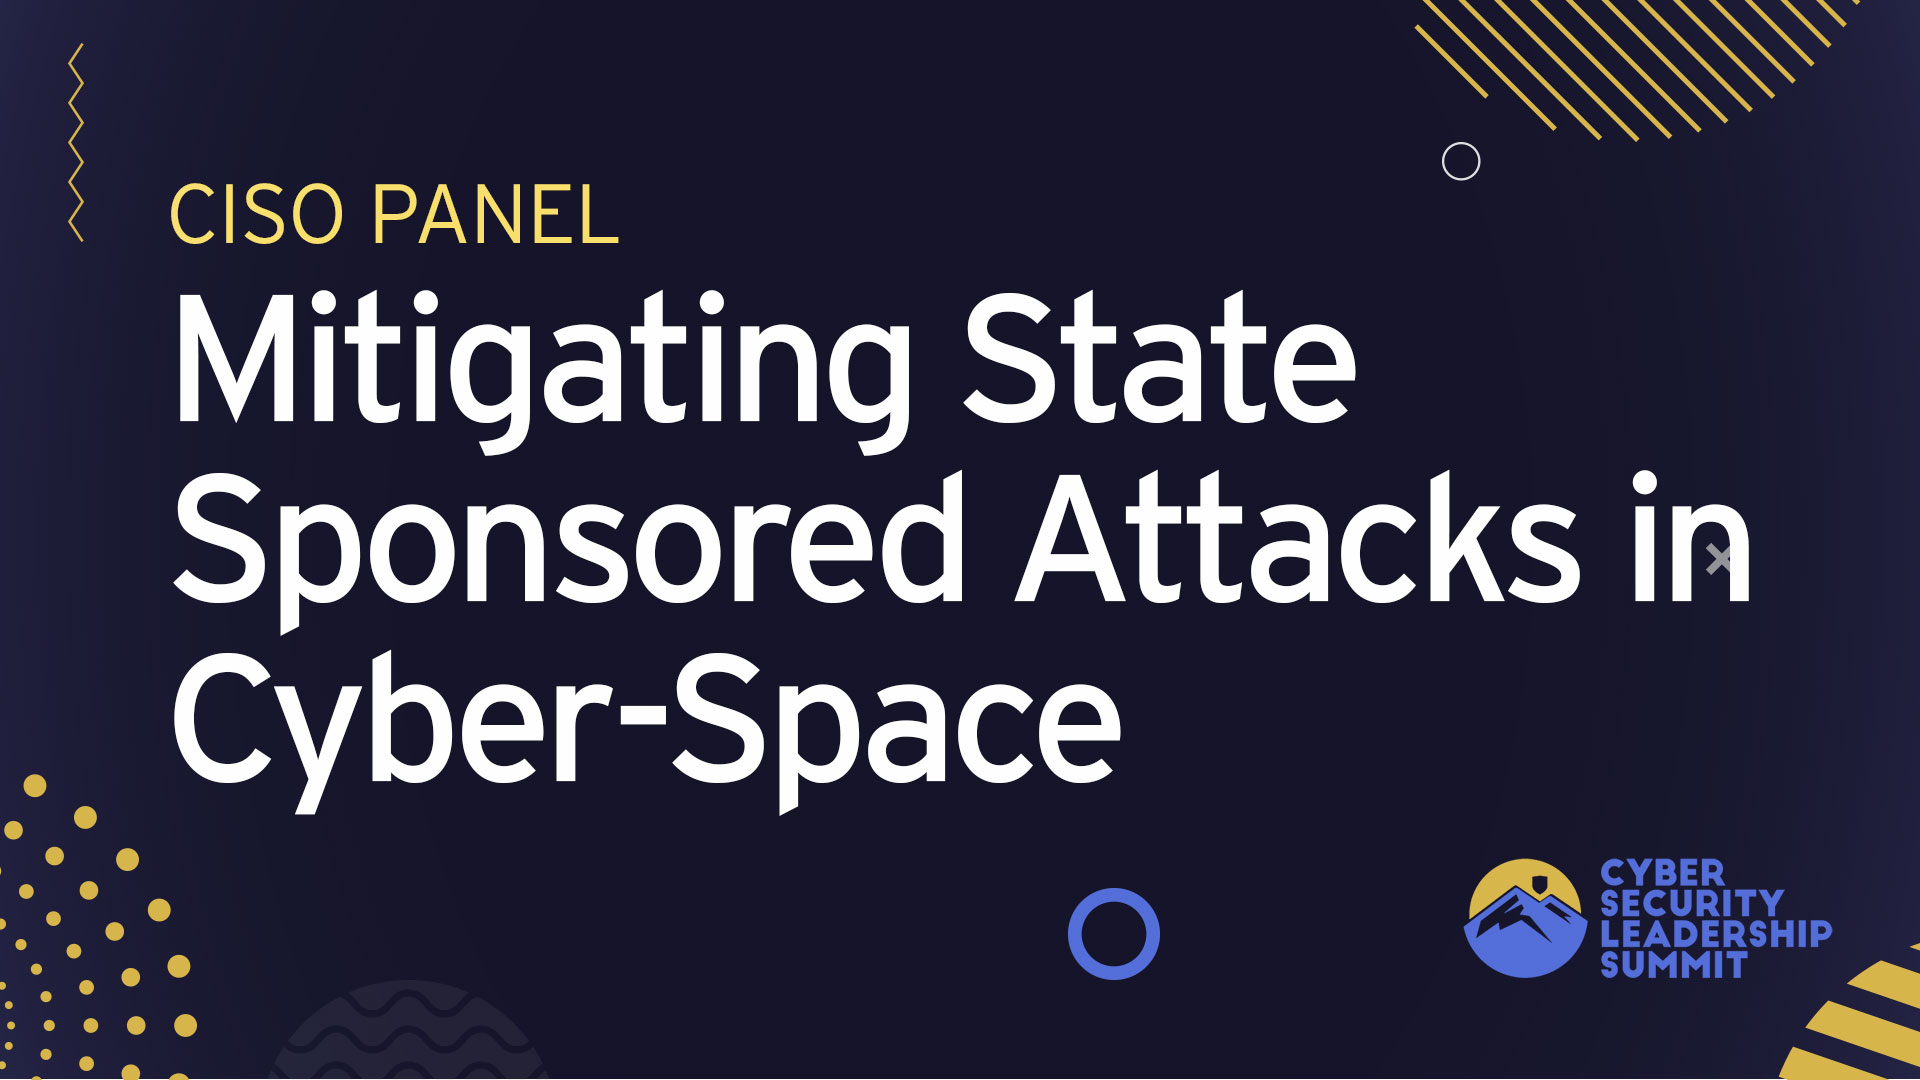 CISO Panel | Mitigating State Sponsored Attacks in Cyber-Space